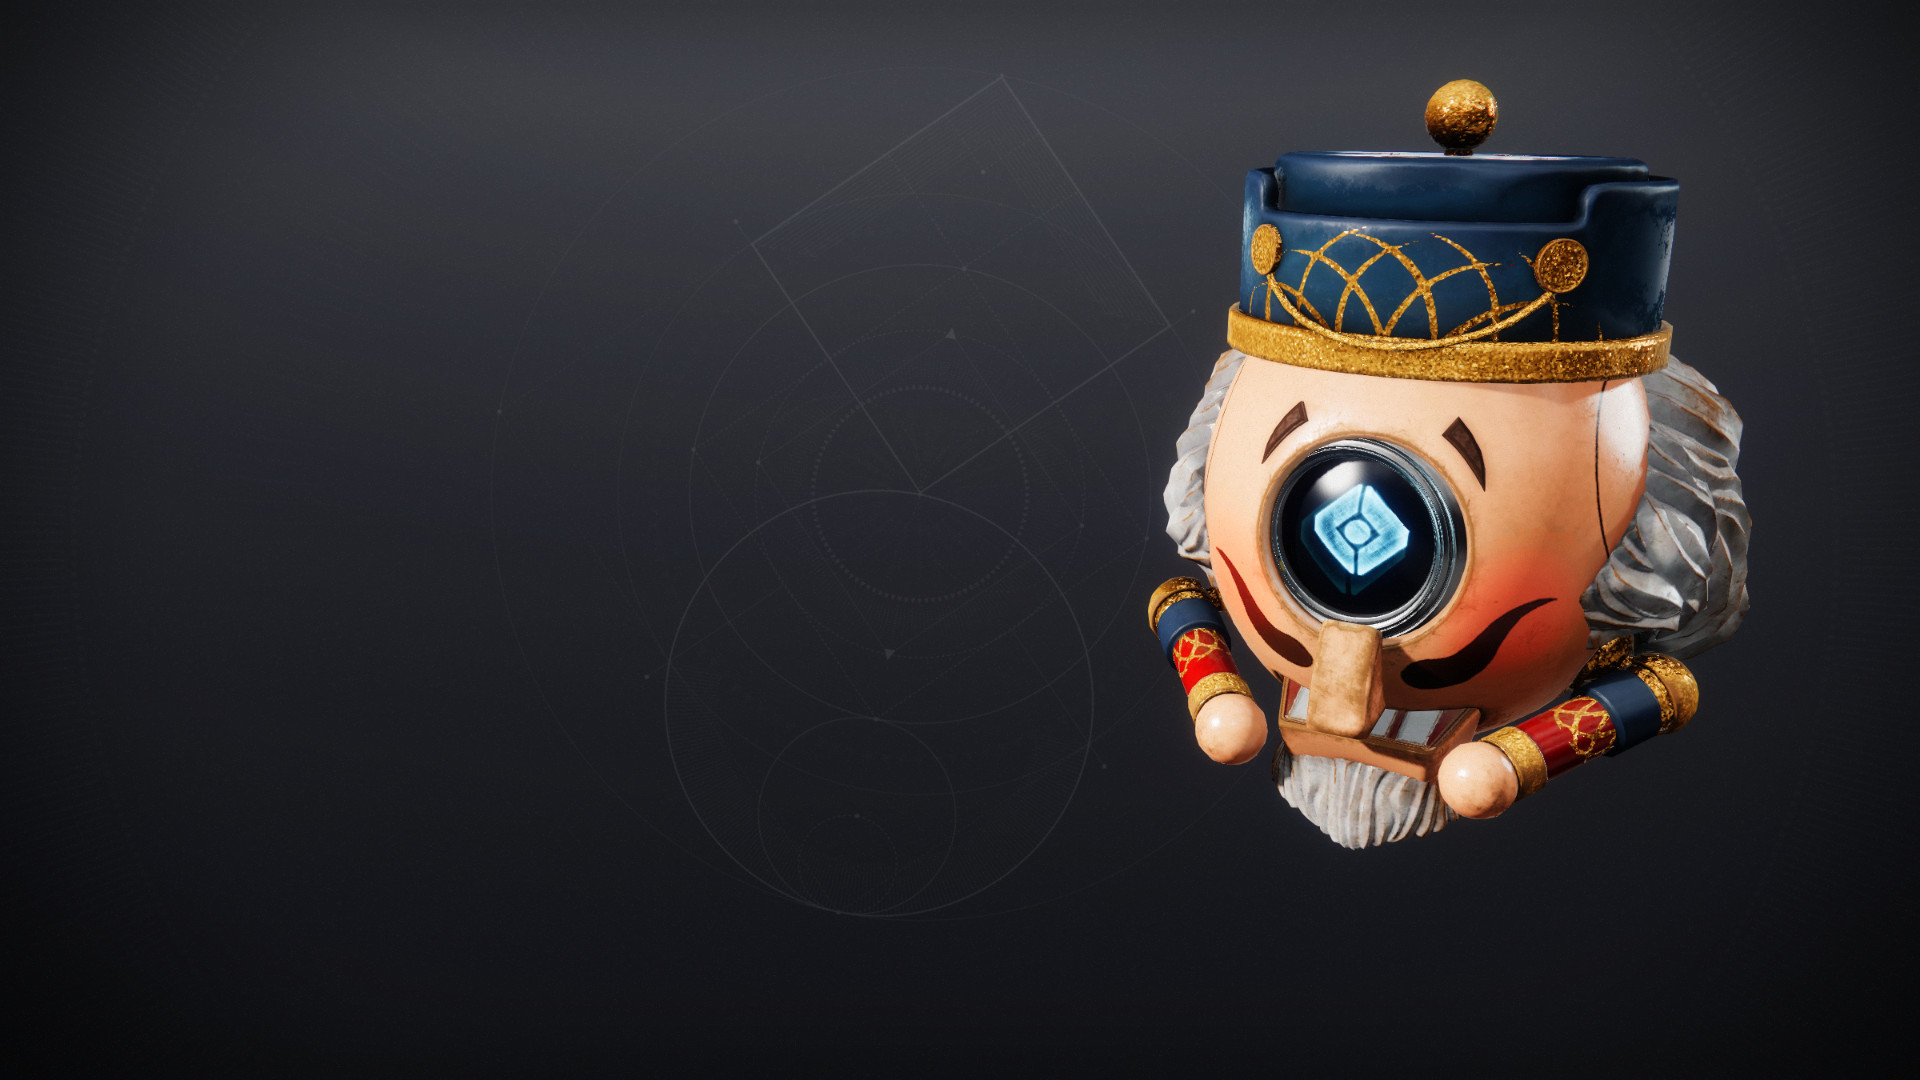 An in-game render of the Nutcracker Shell.